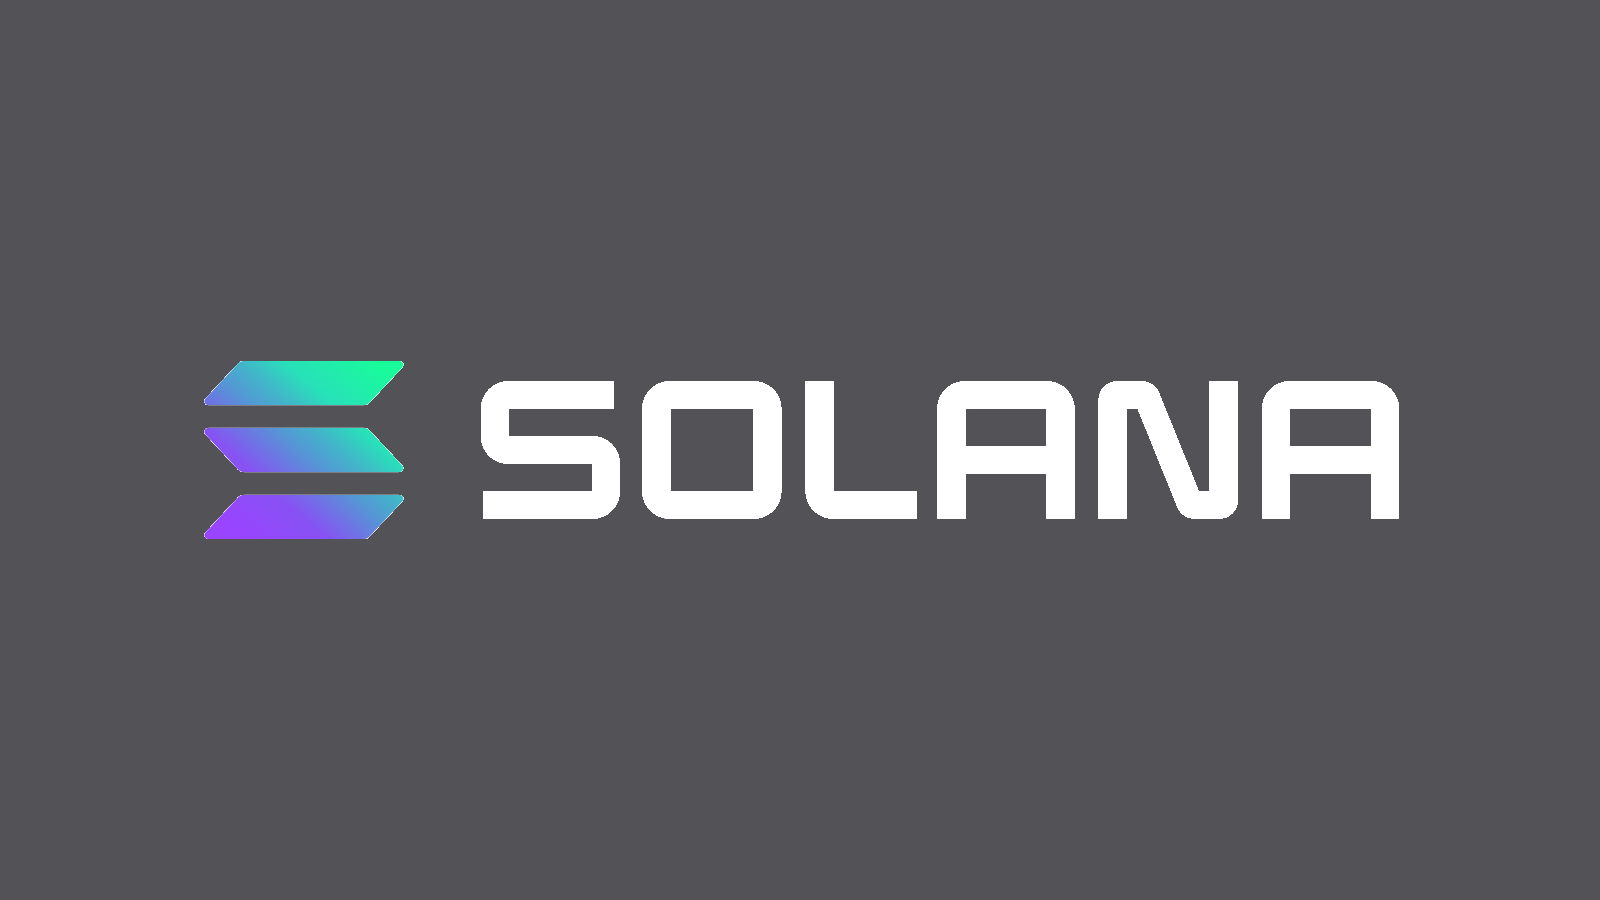 Thousands of Solana wallets drained in attack using unknown exploit